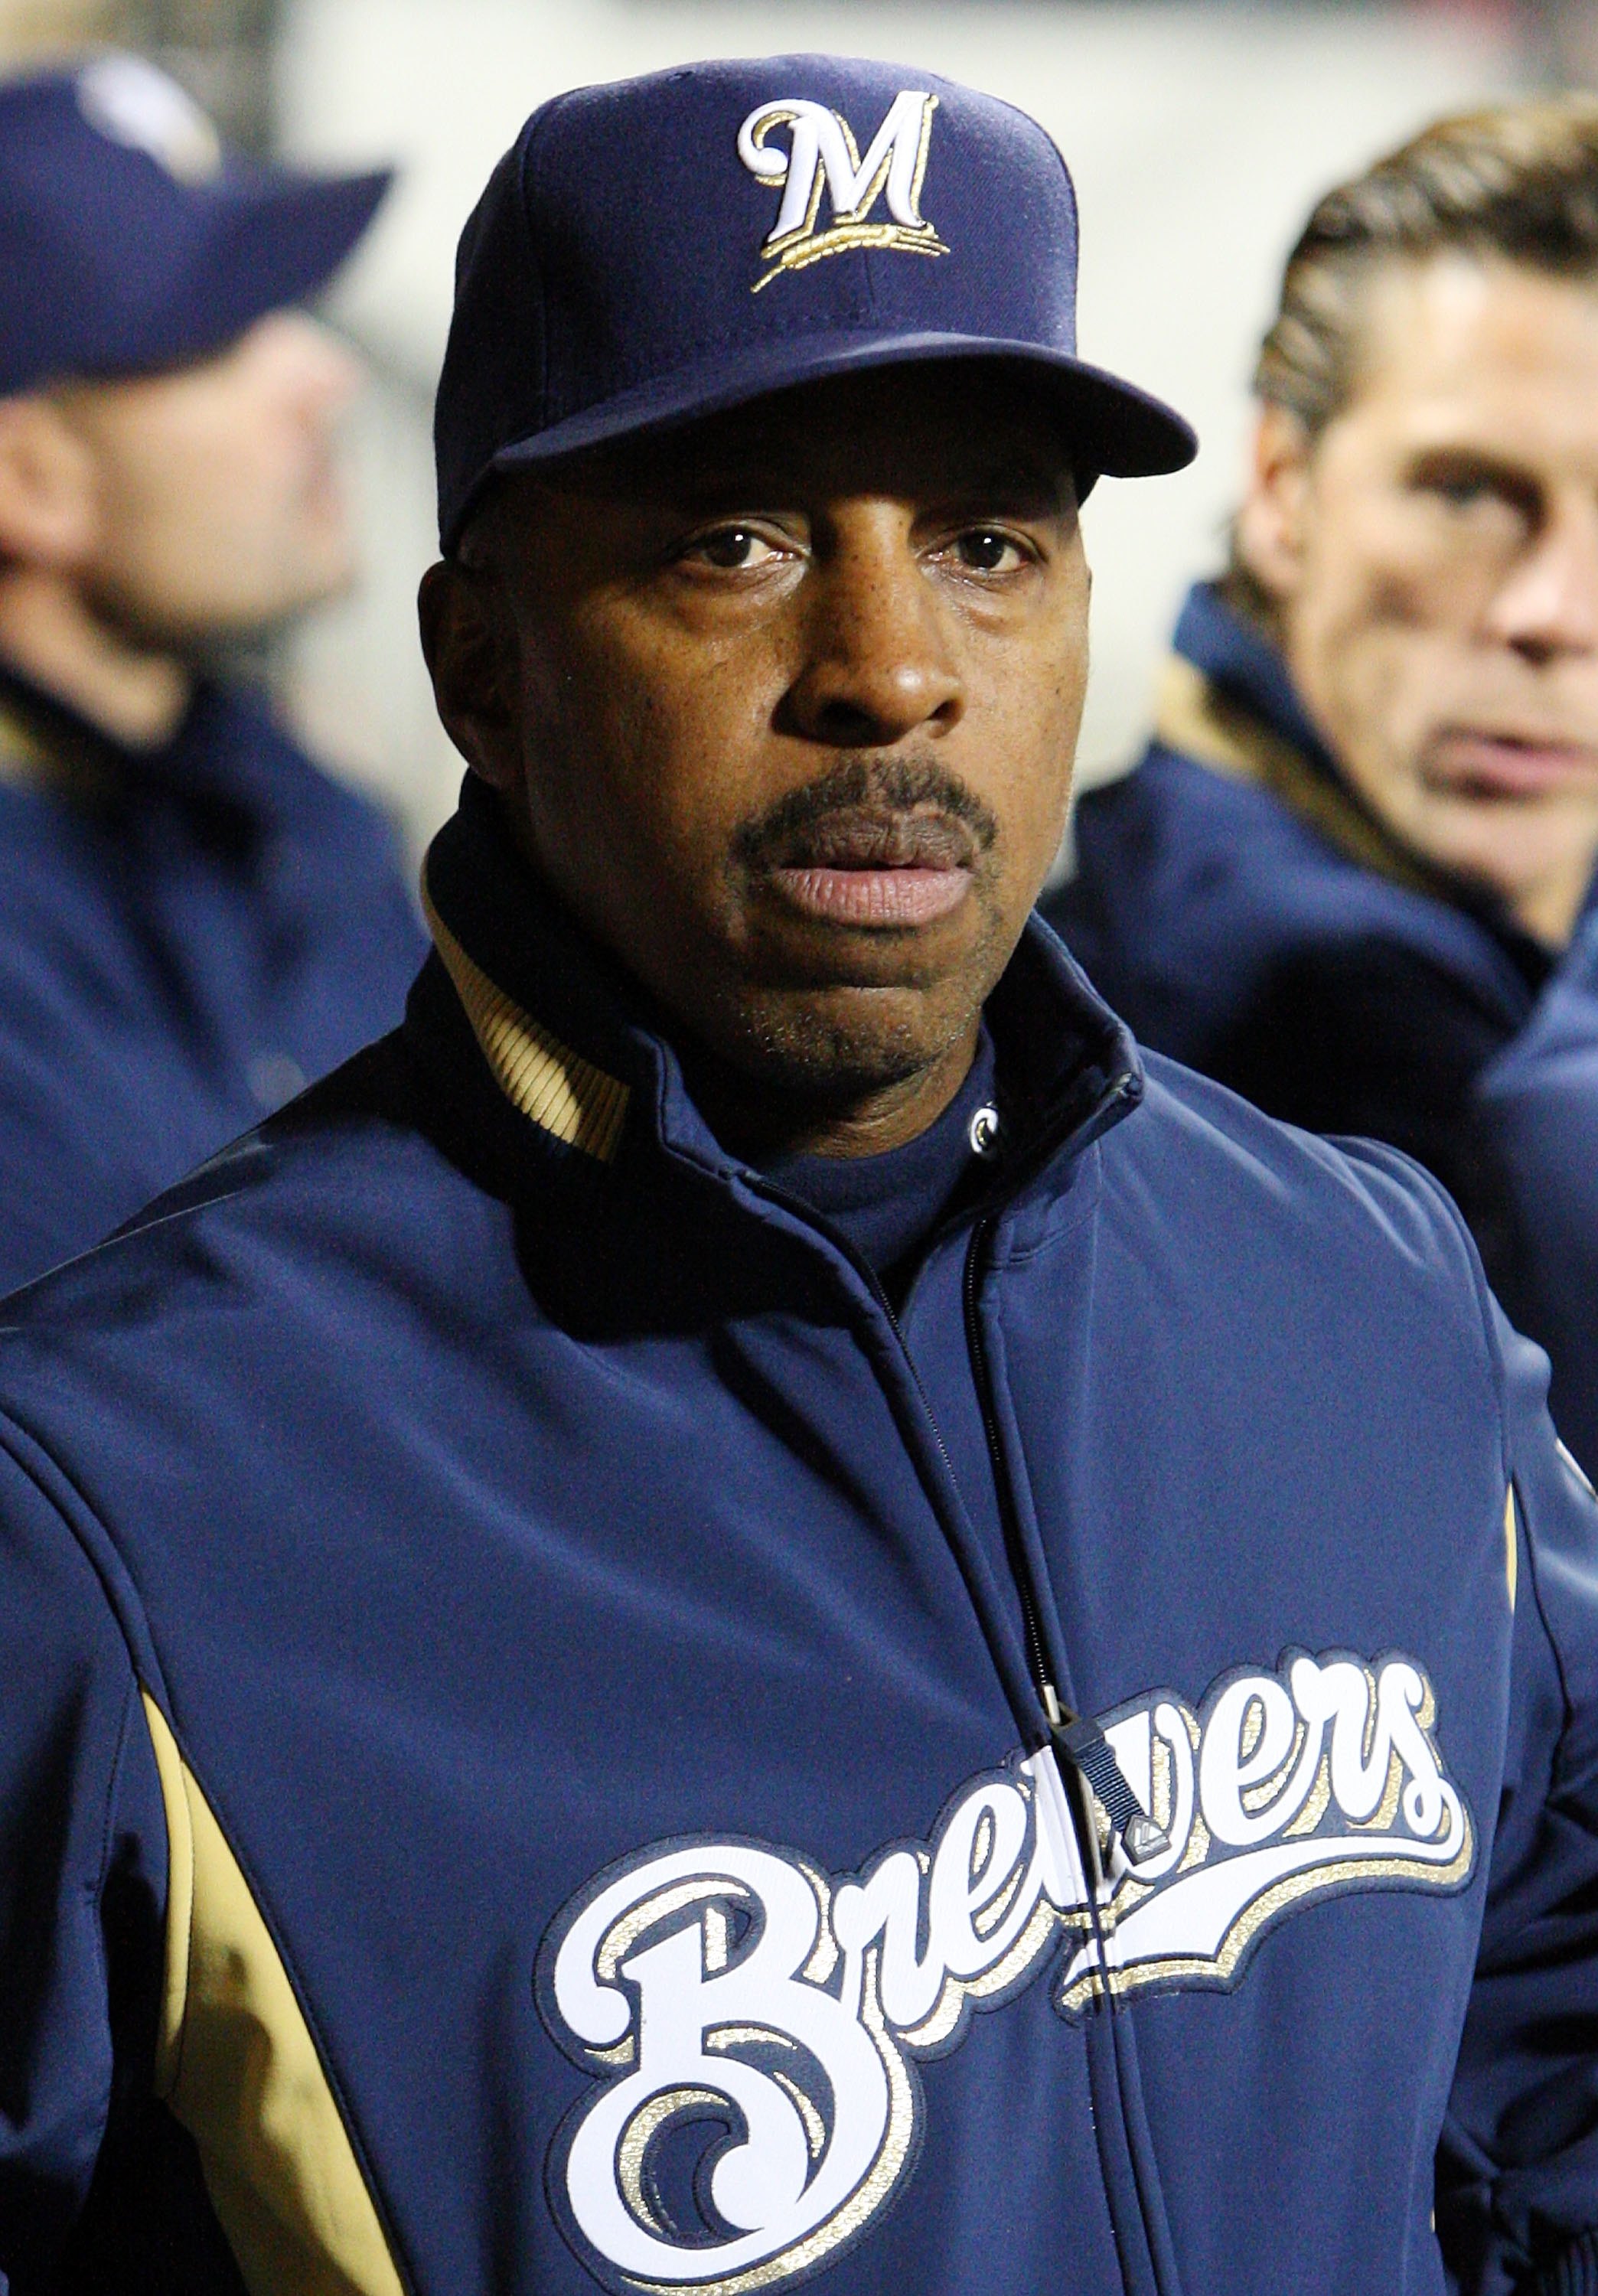 NEW YORK - APRIL 17:  Bench coach Willie Randolph of the Milwaukee Brewers looks on against the New York Mets on April 17, 2009 at Citi Field in the Flushing neighborhood of the Queens borough of New York City.  (Photo by Jim McIsaac/Getty Images)